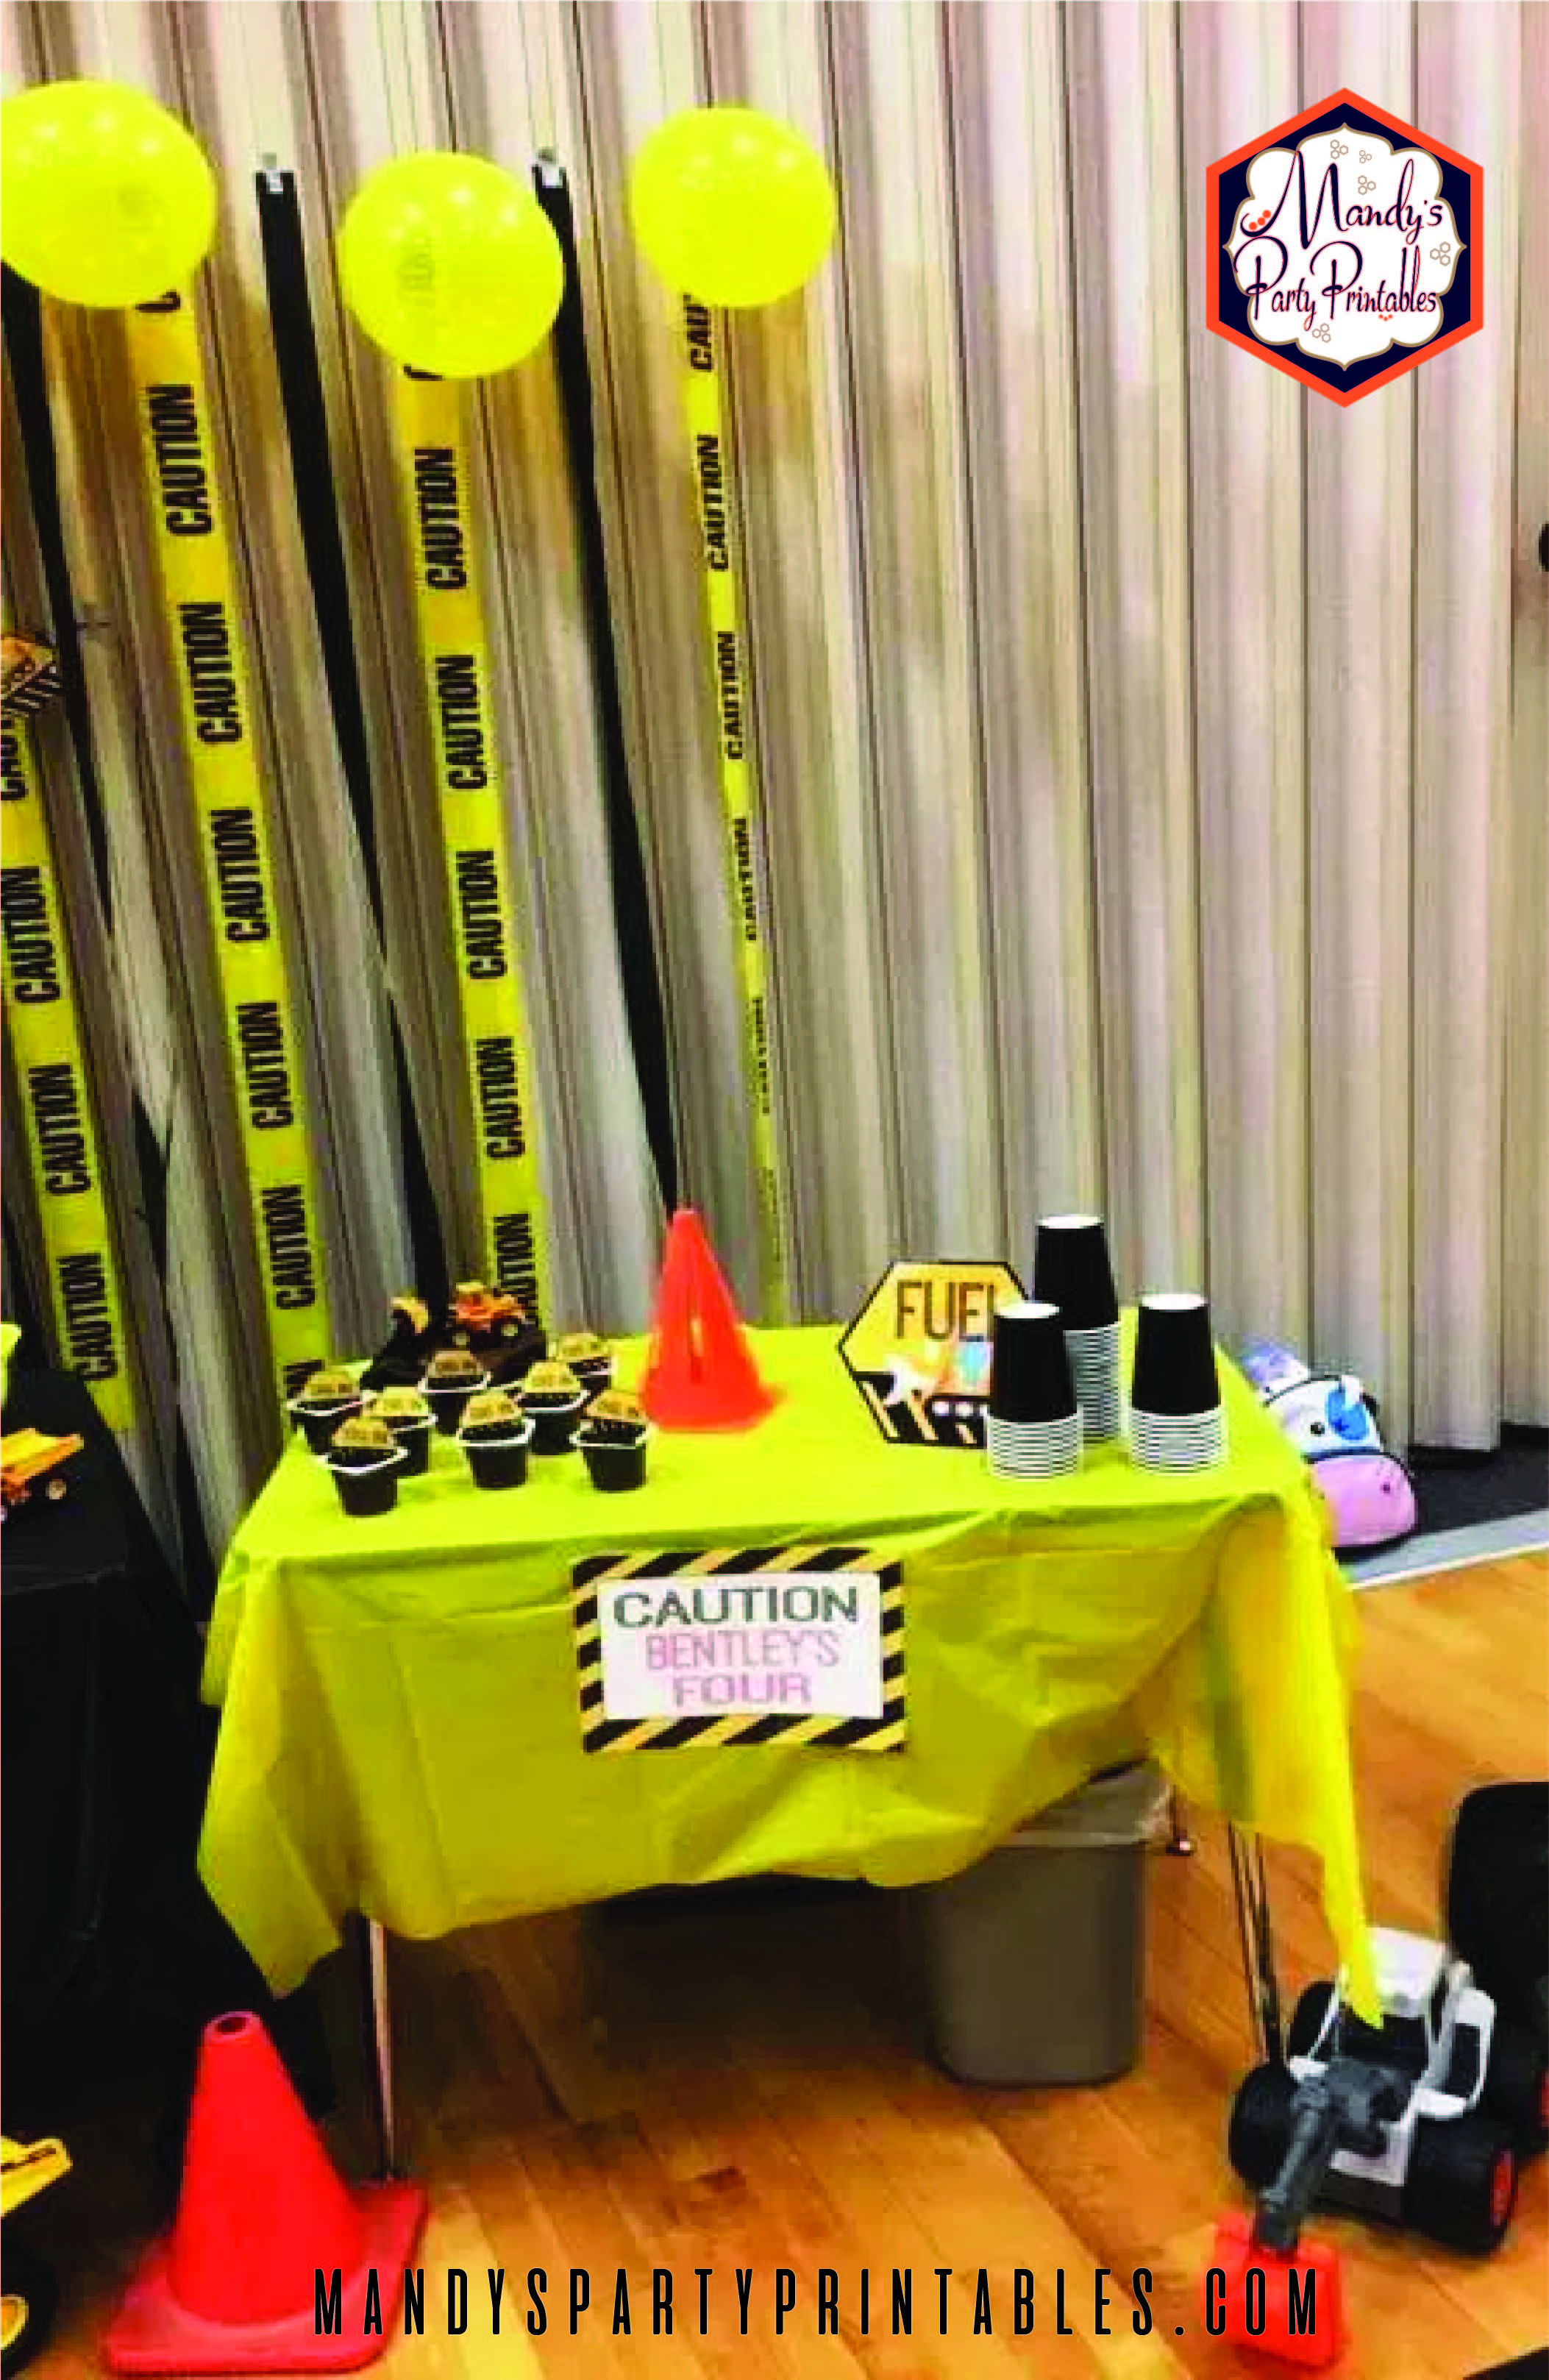 Table with "Fuel" sign and Caution Sign | Mandy's Party Printables